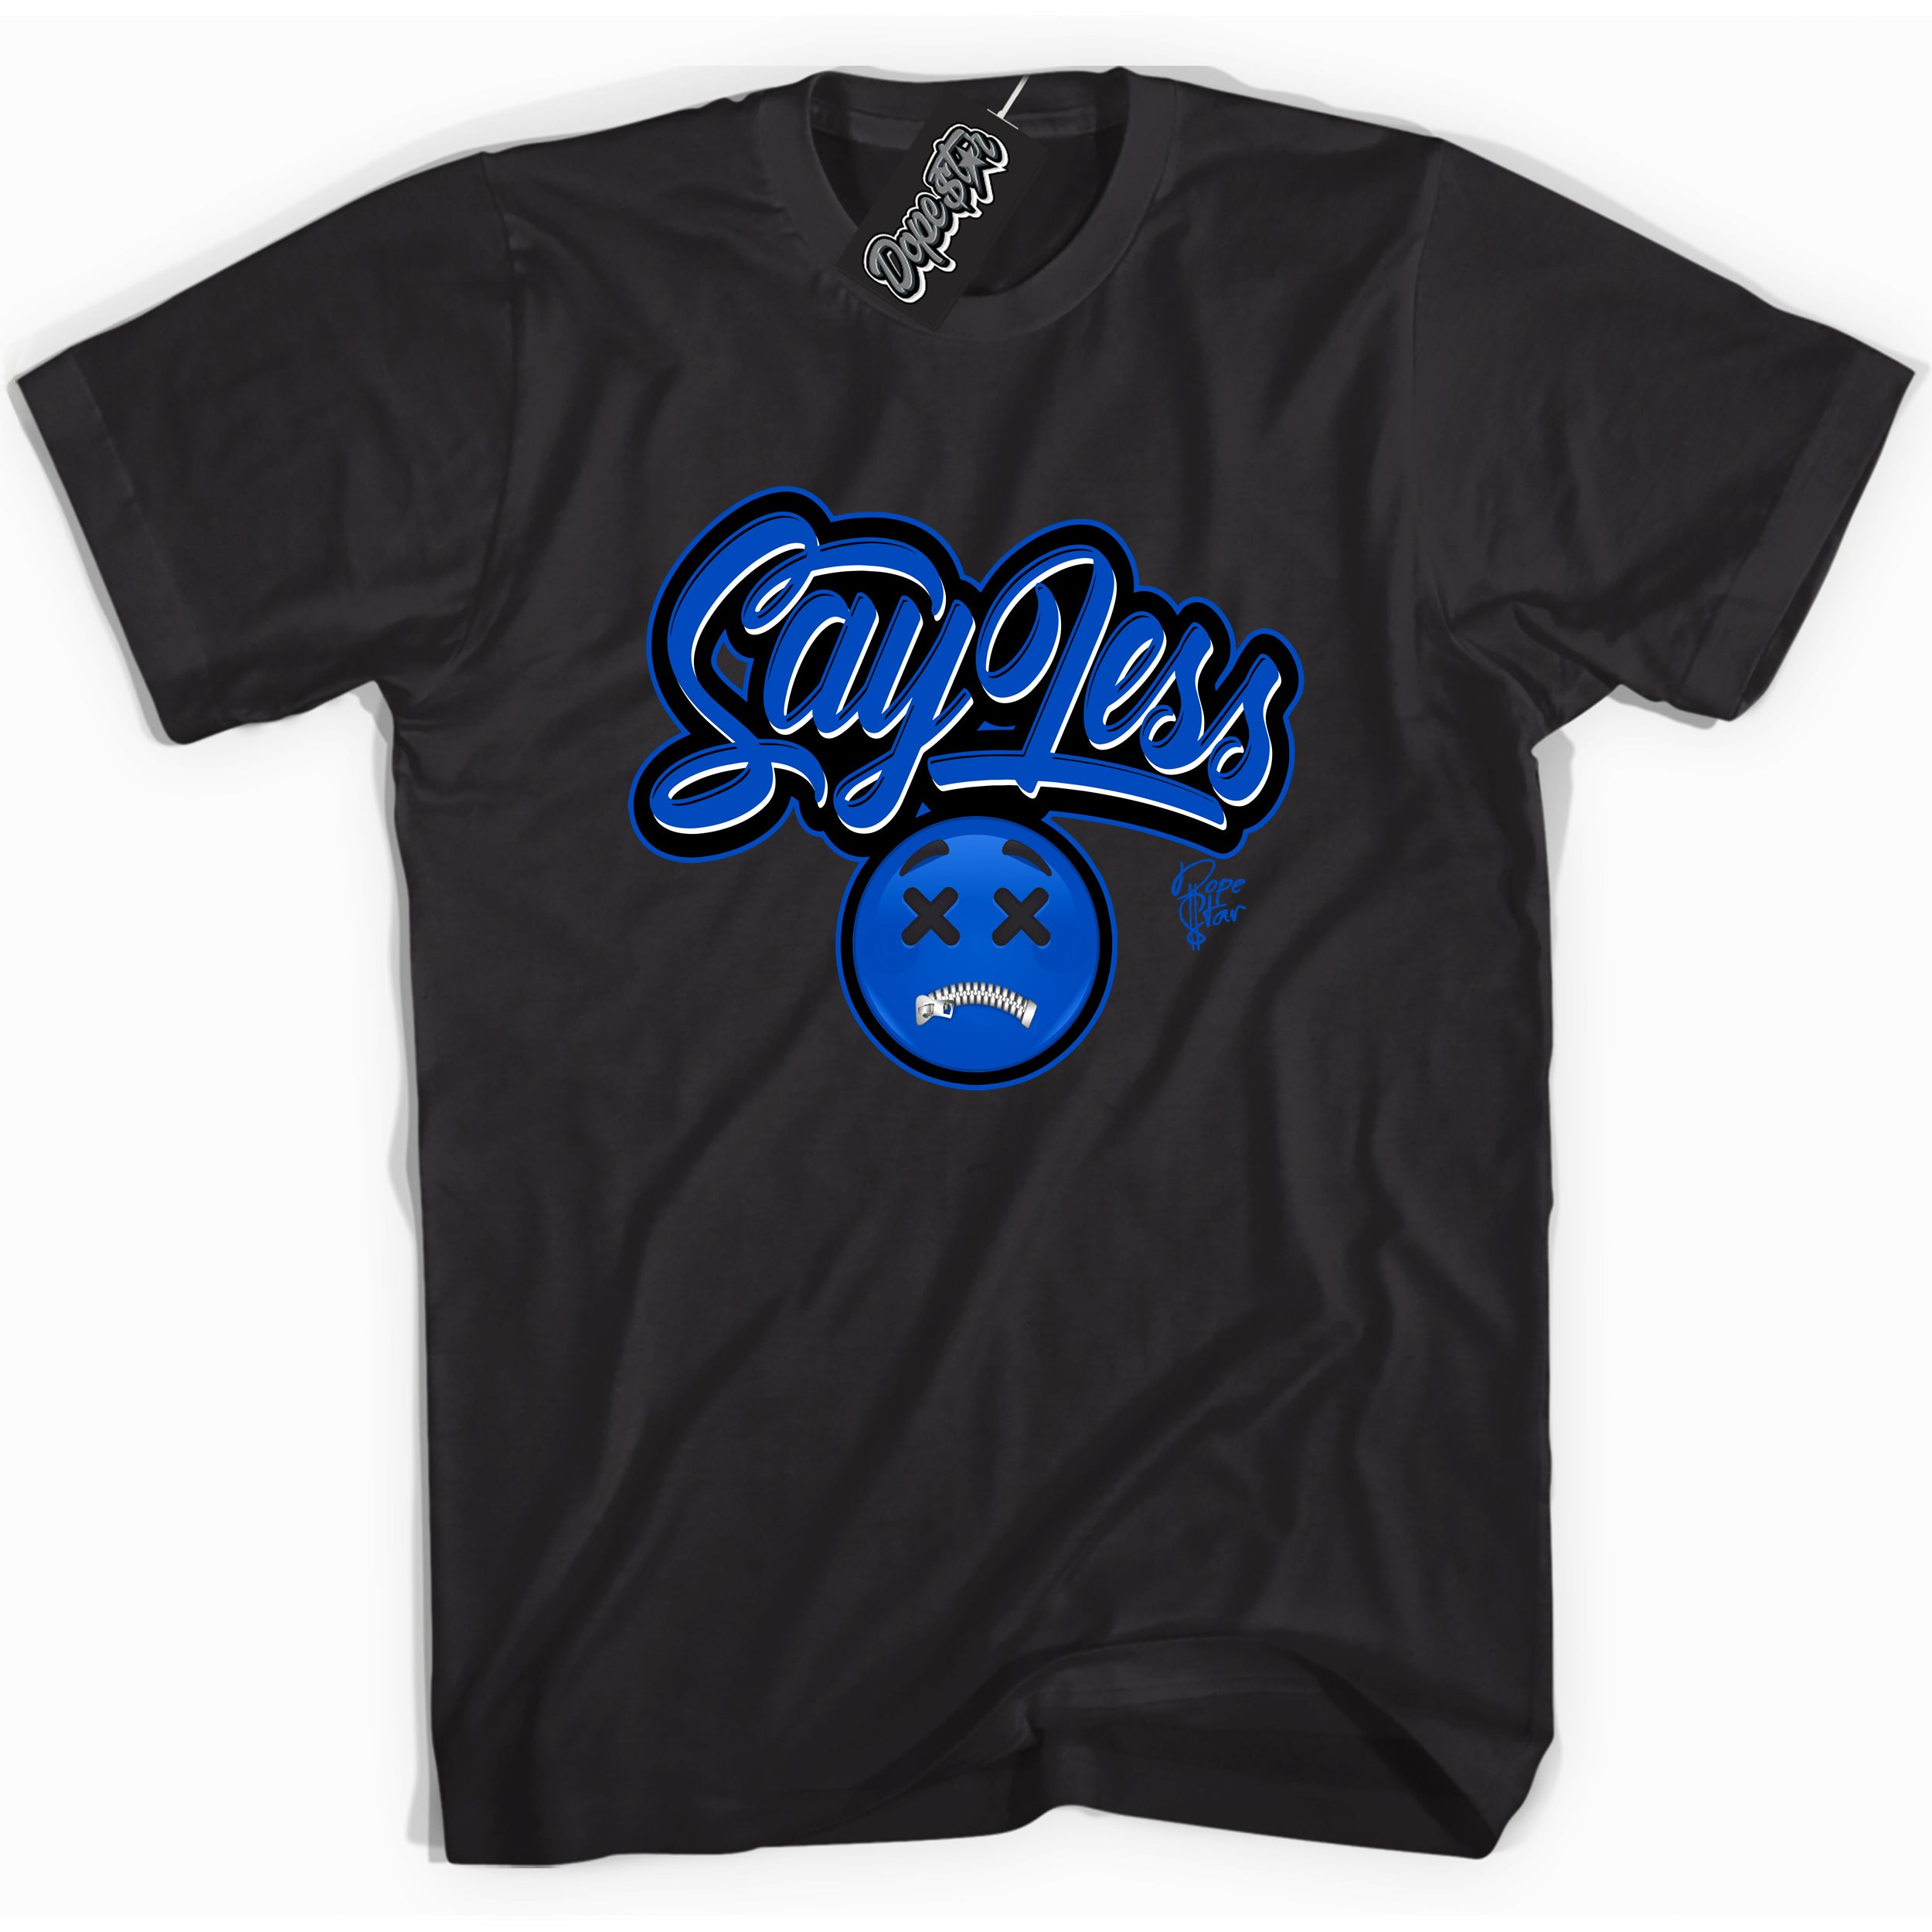 Cool Black graphic tee with Say Less print, that perfectly matches OG Royal Reimagined 1s sneakers 